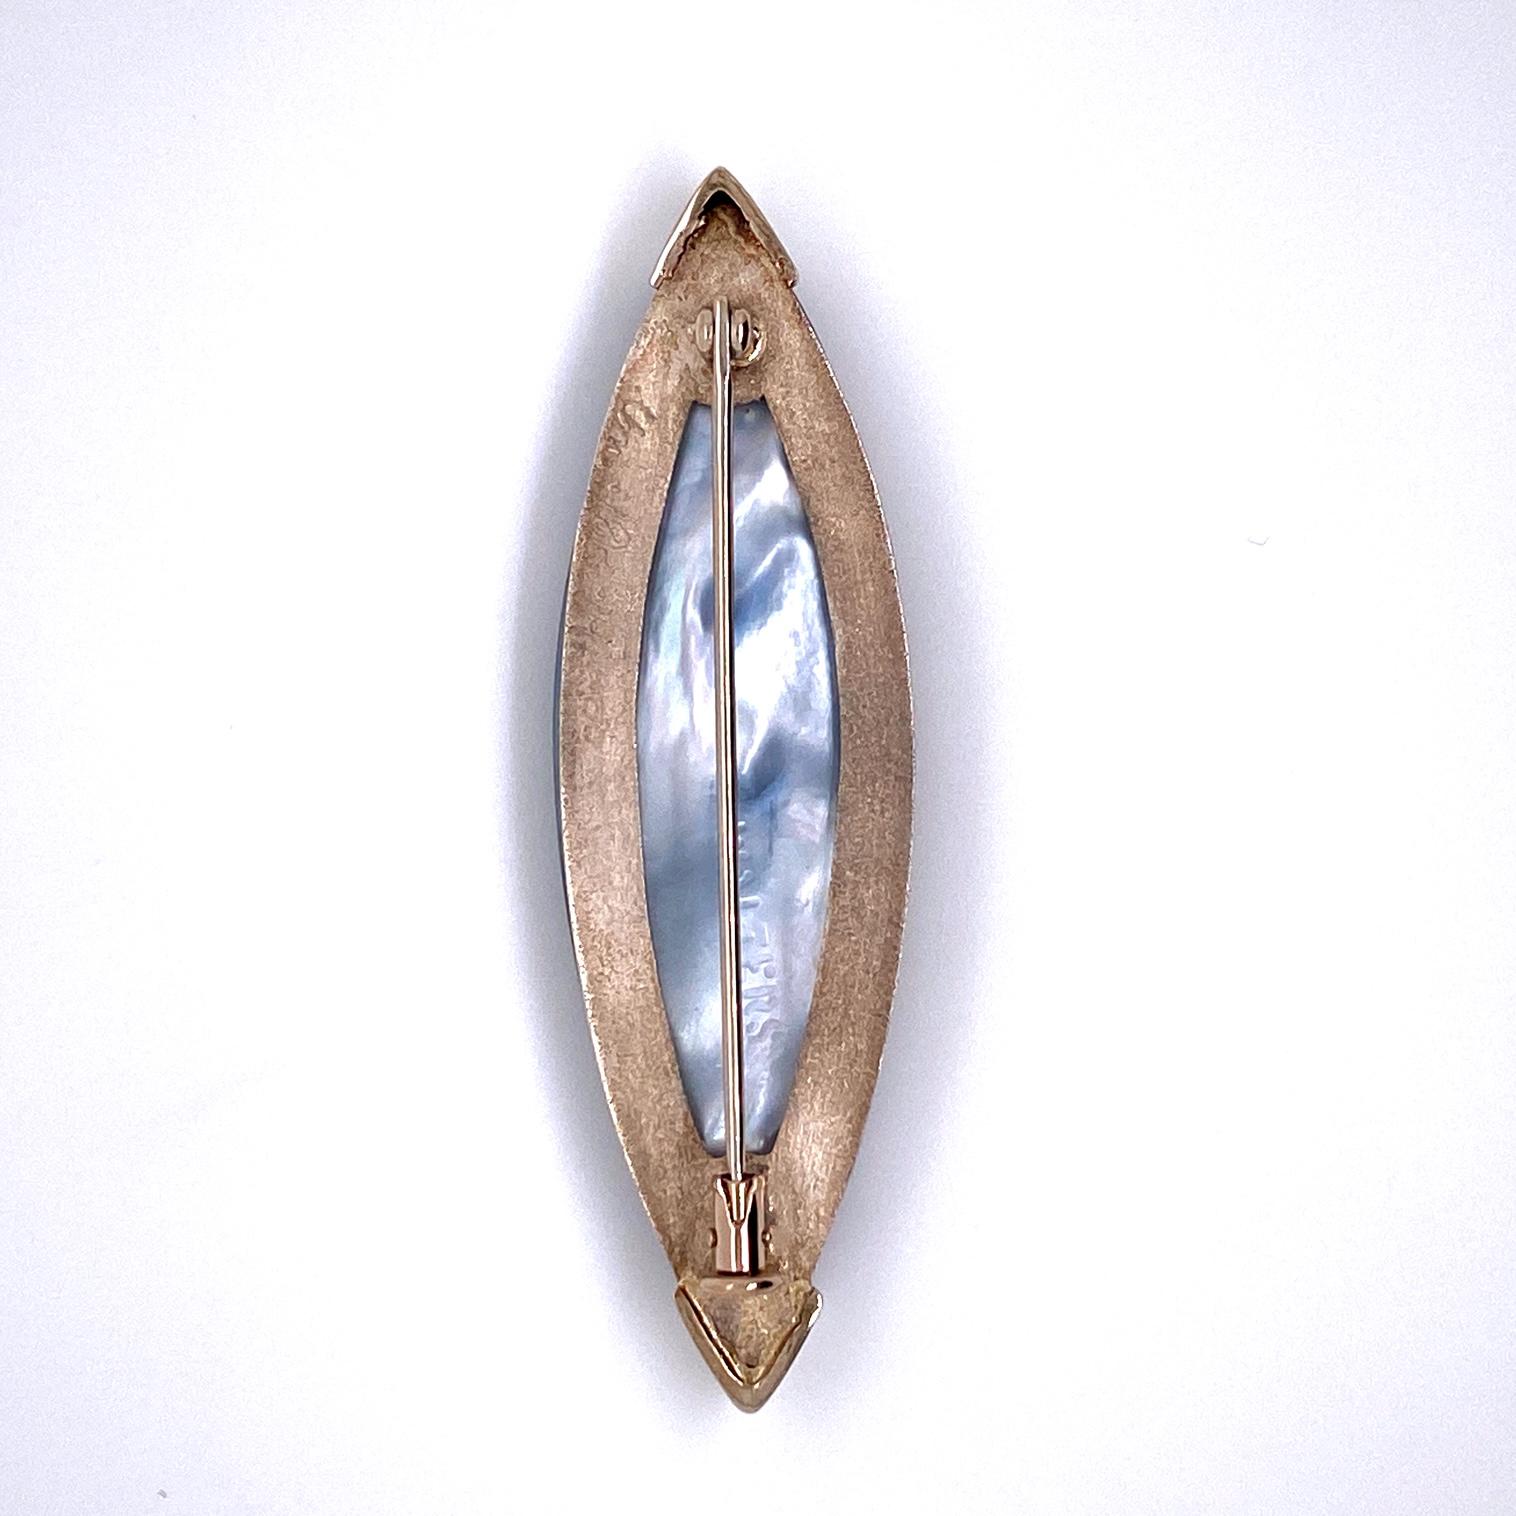 A brooch made with a Steve Walters Stone of blue tiger eye, opal, quartz, and titanium, set in sterling silver. This brooch was made and designed by llyn strong.